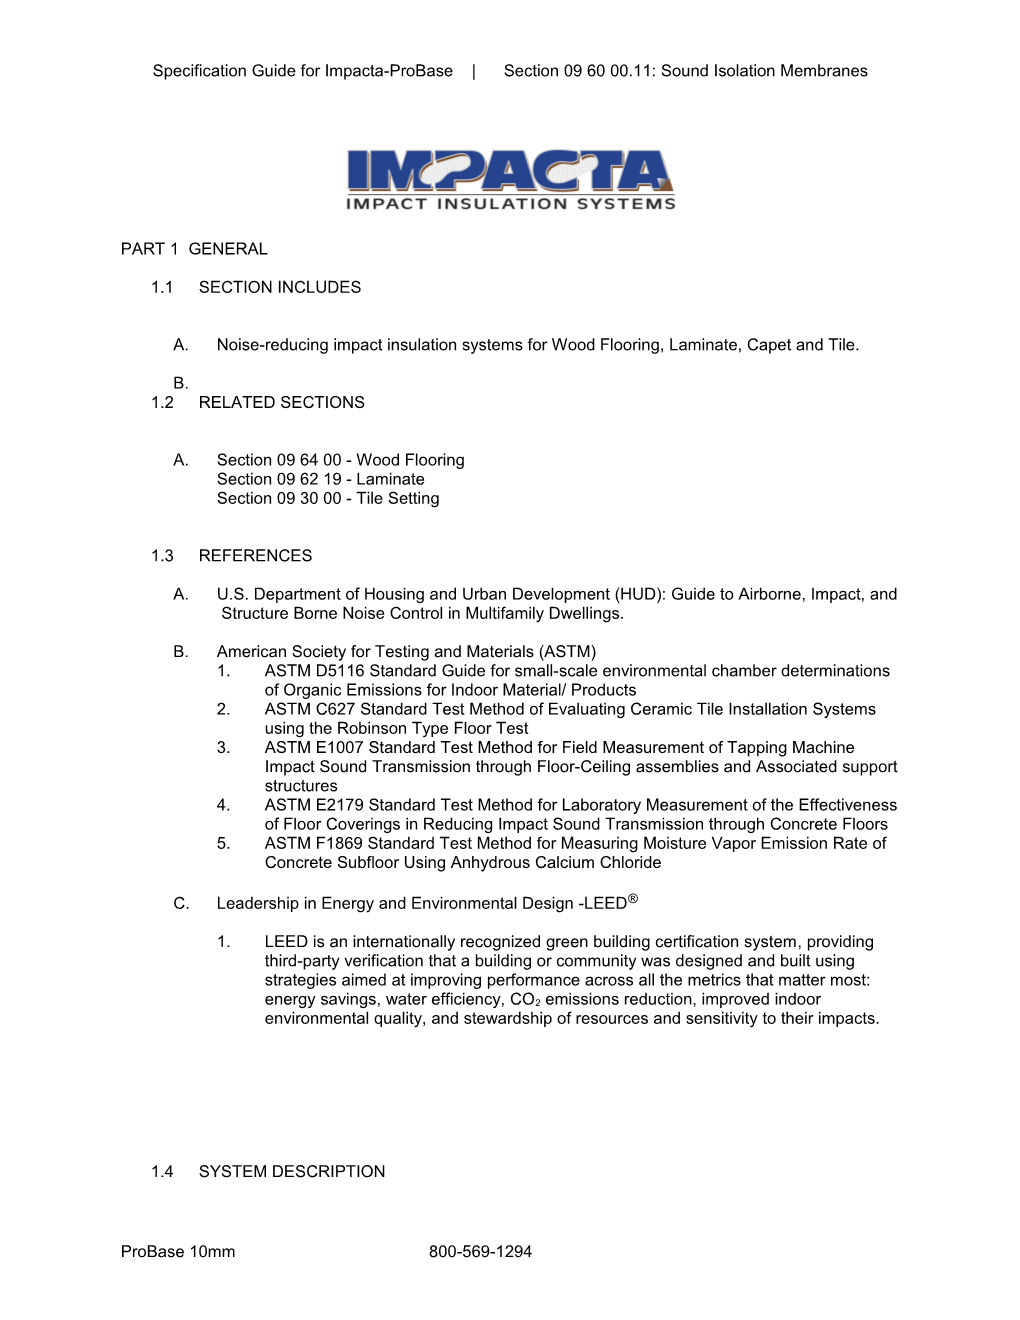 Specification Guide for Impacta-Regupol Probase Section 09 60 00.11: Sound Isolation Membranes s1